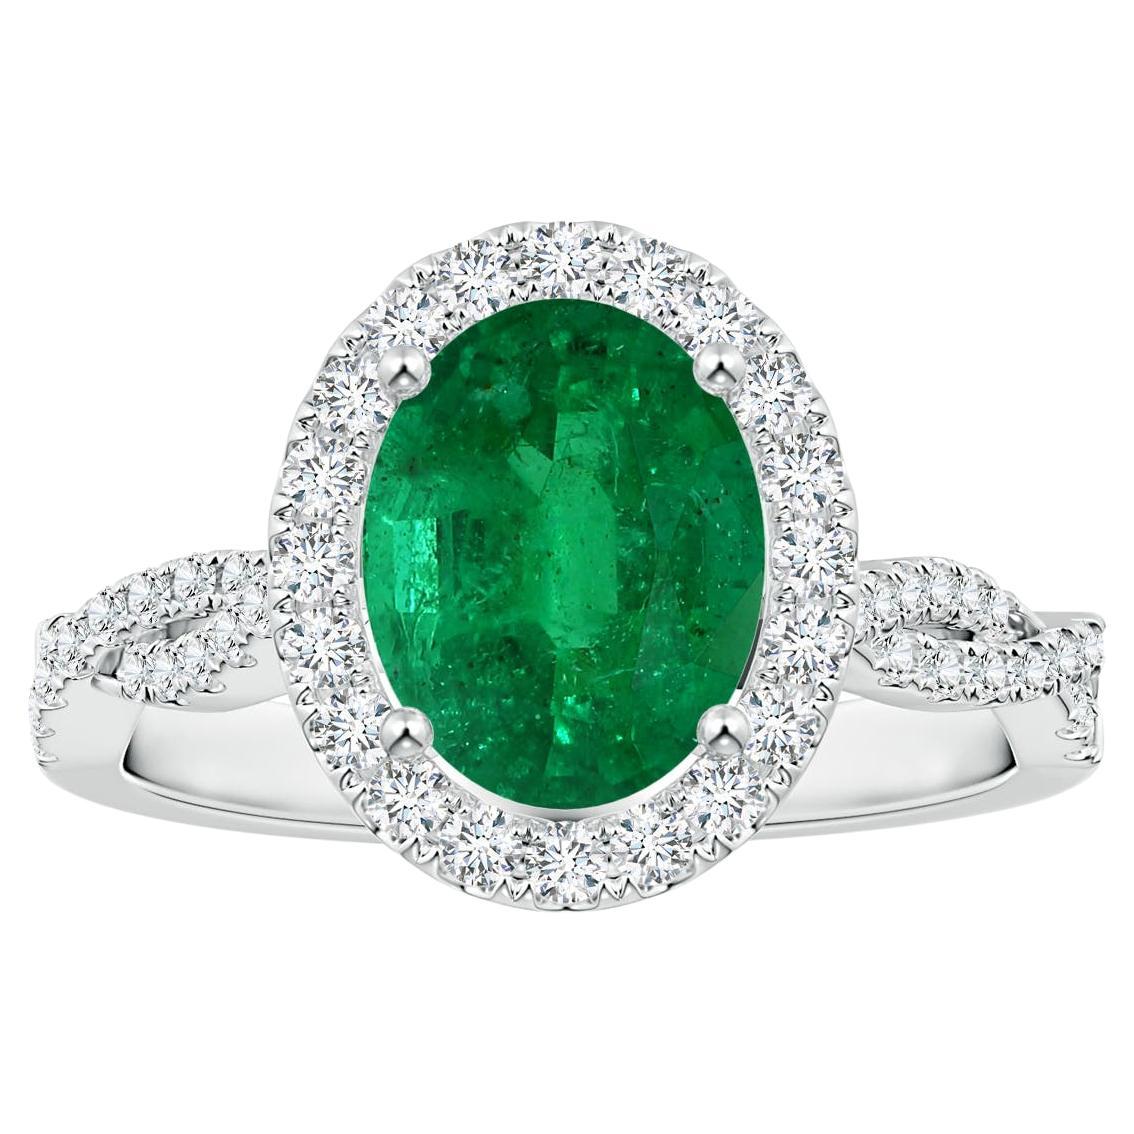 ANGARA GIA Certified Natural Emerald Halo Ring in White Gold with Diamond Shank